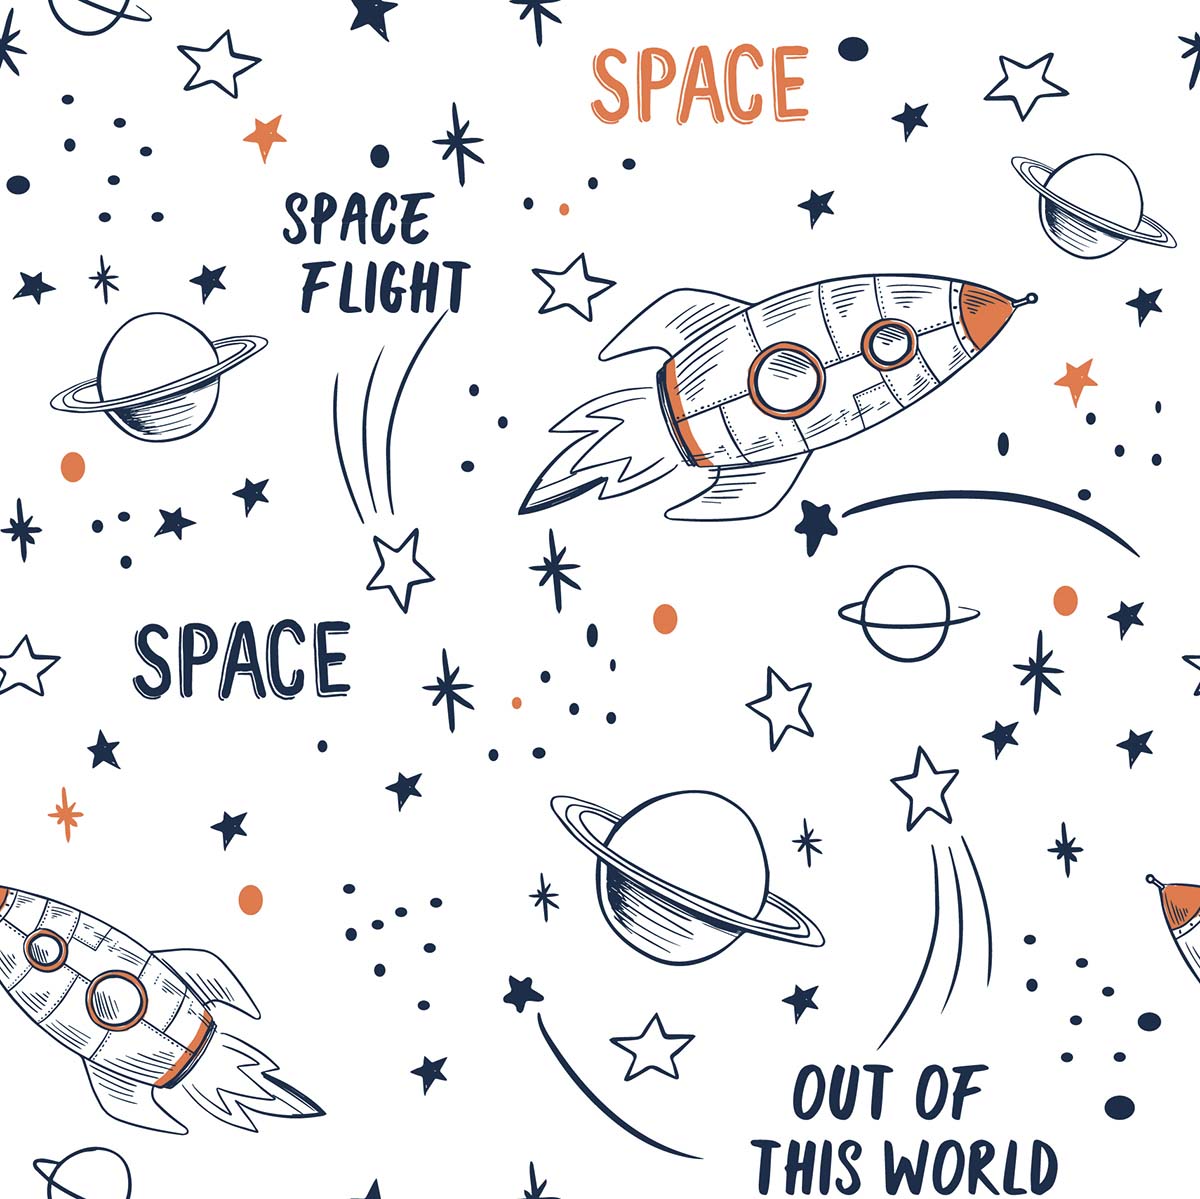 A pattern of rockets and planets